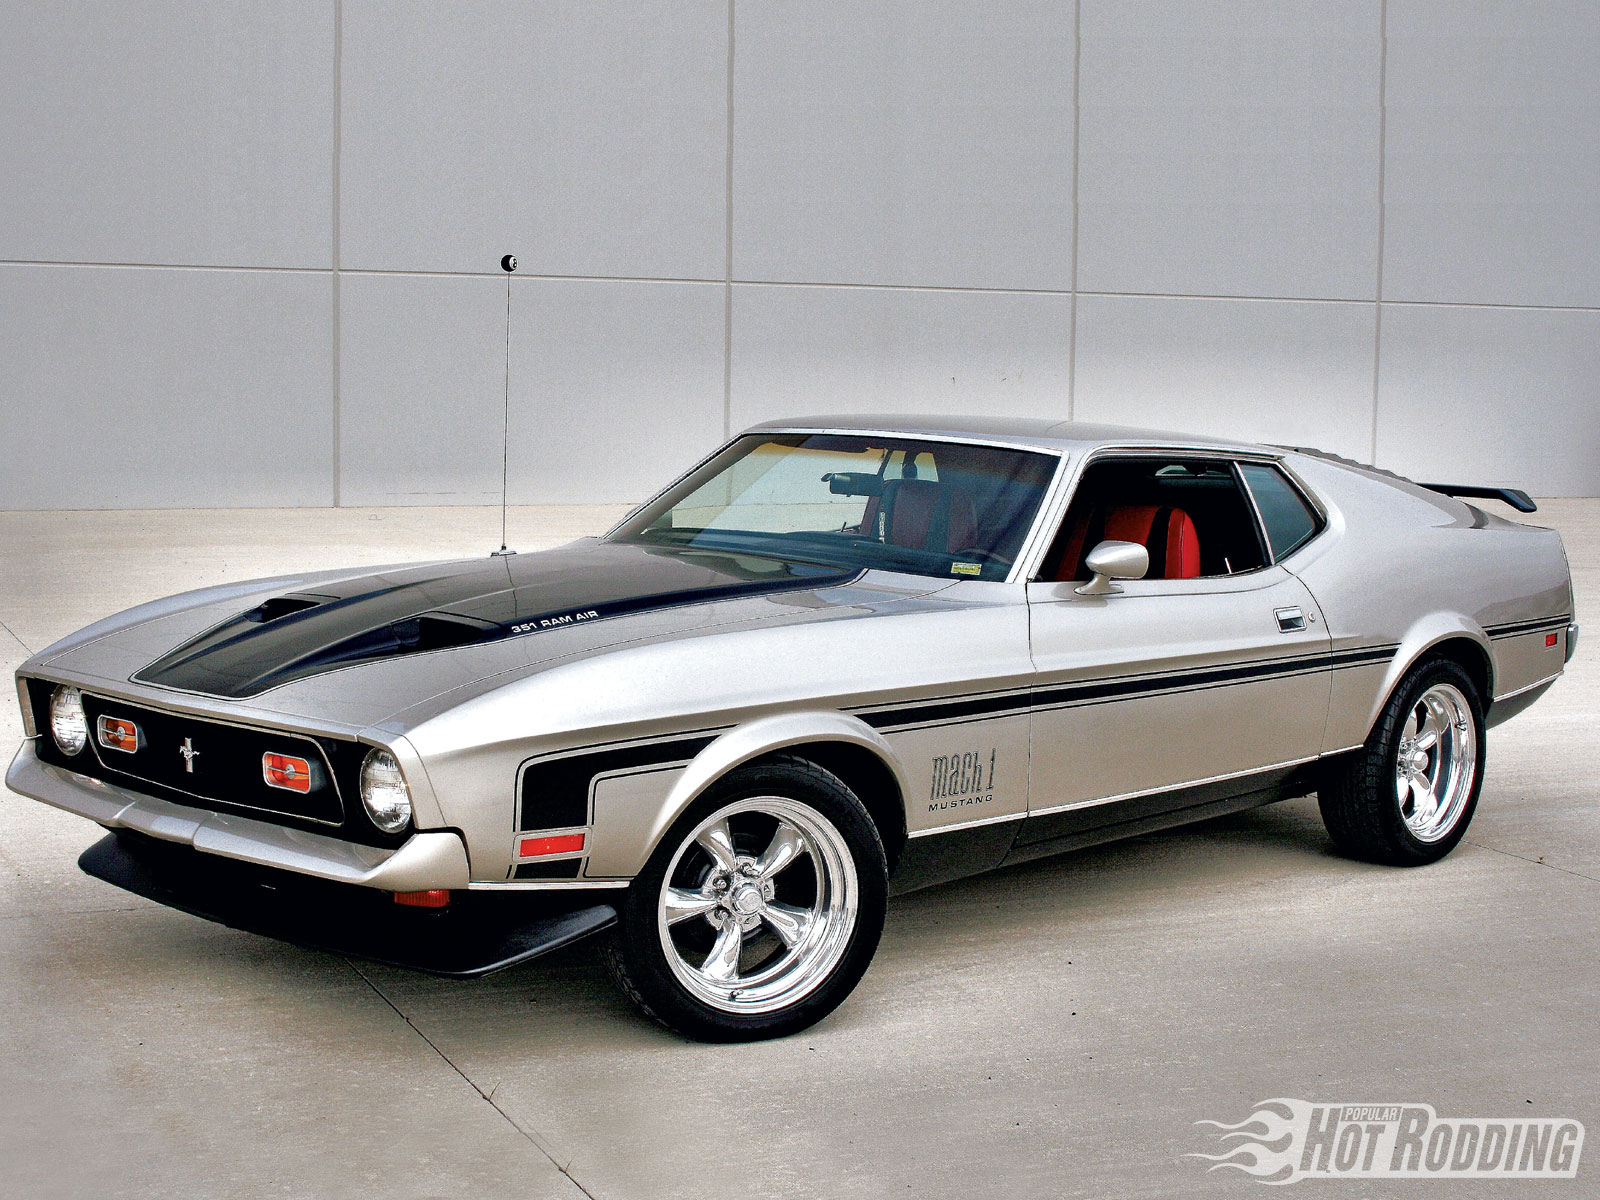 ford mustang mach 1, vehicles, classic car, fastback, ford, hot rod, muscle car 2160p